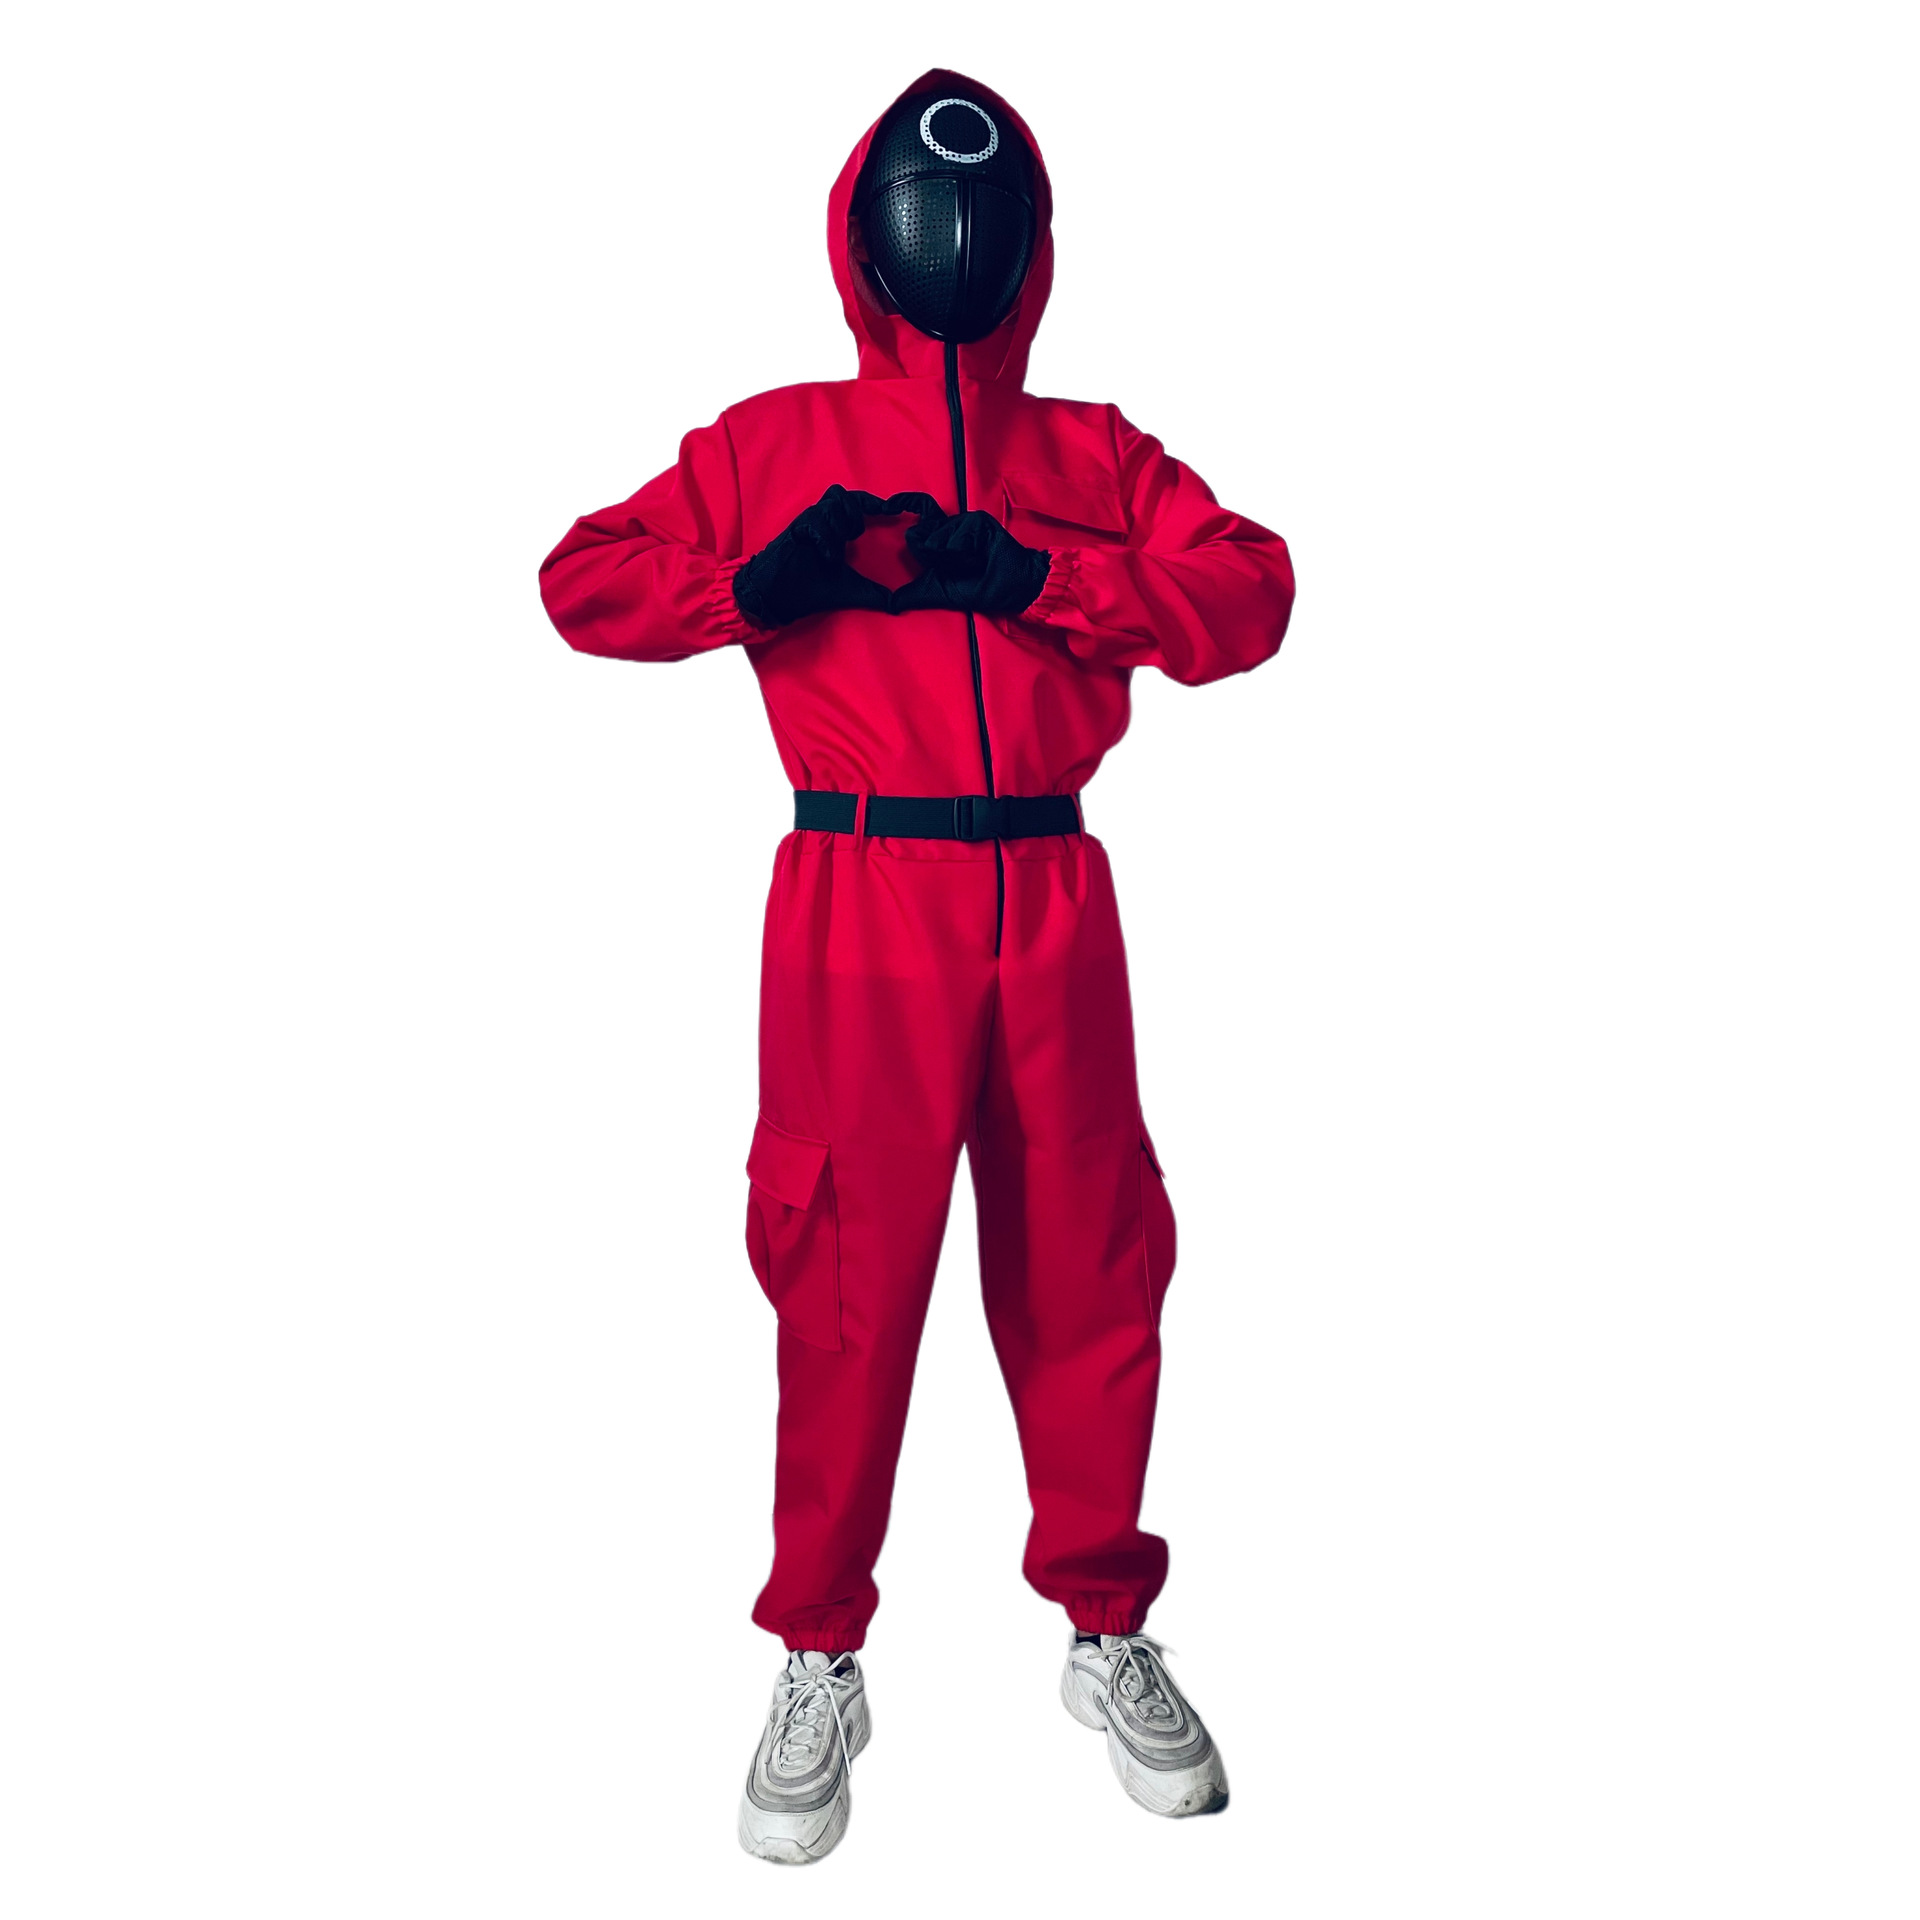 Squid game guard costume red uniform for adults and children